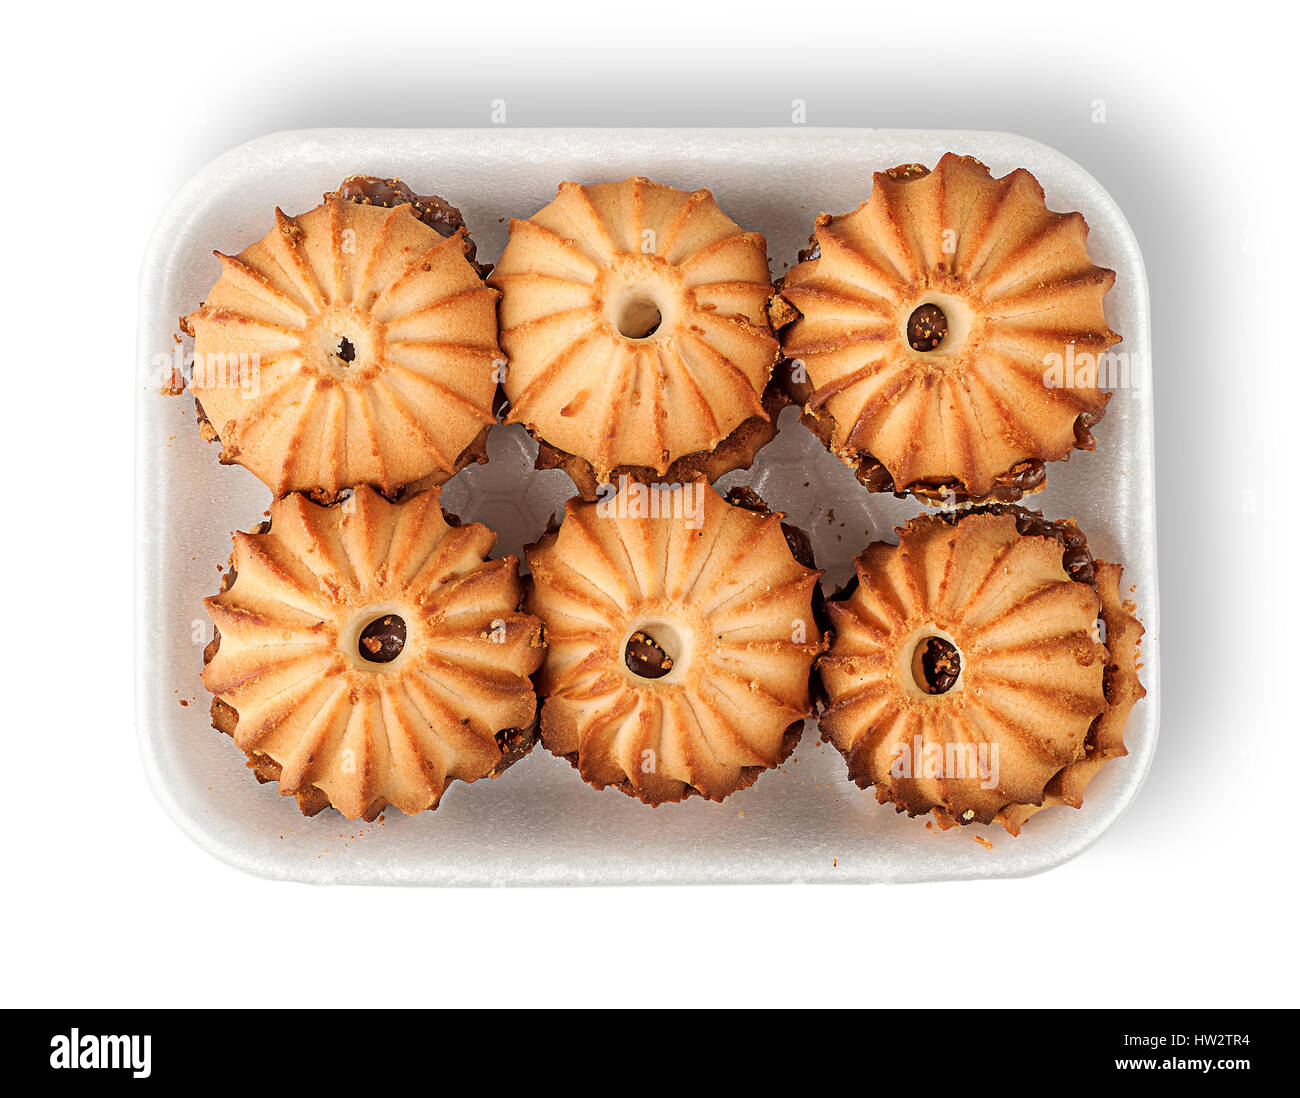 Shortbread biscuits with filling in plastic tray top view isolated on white background Stock Photo